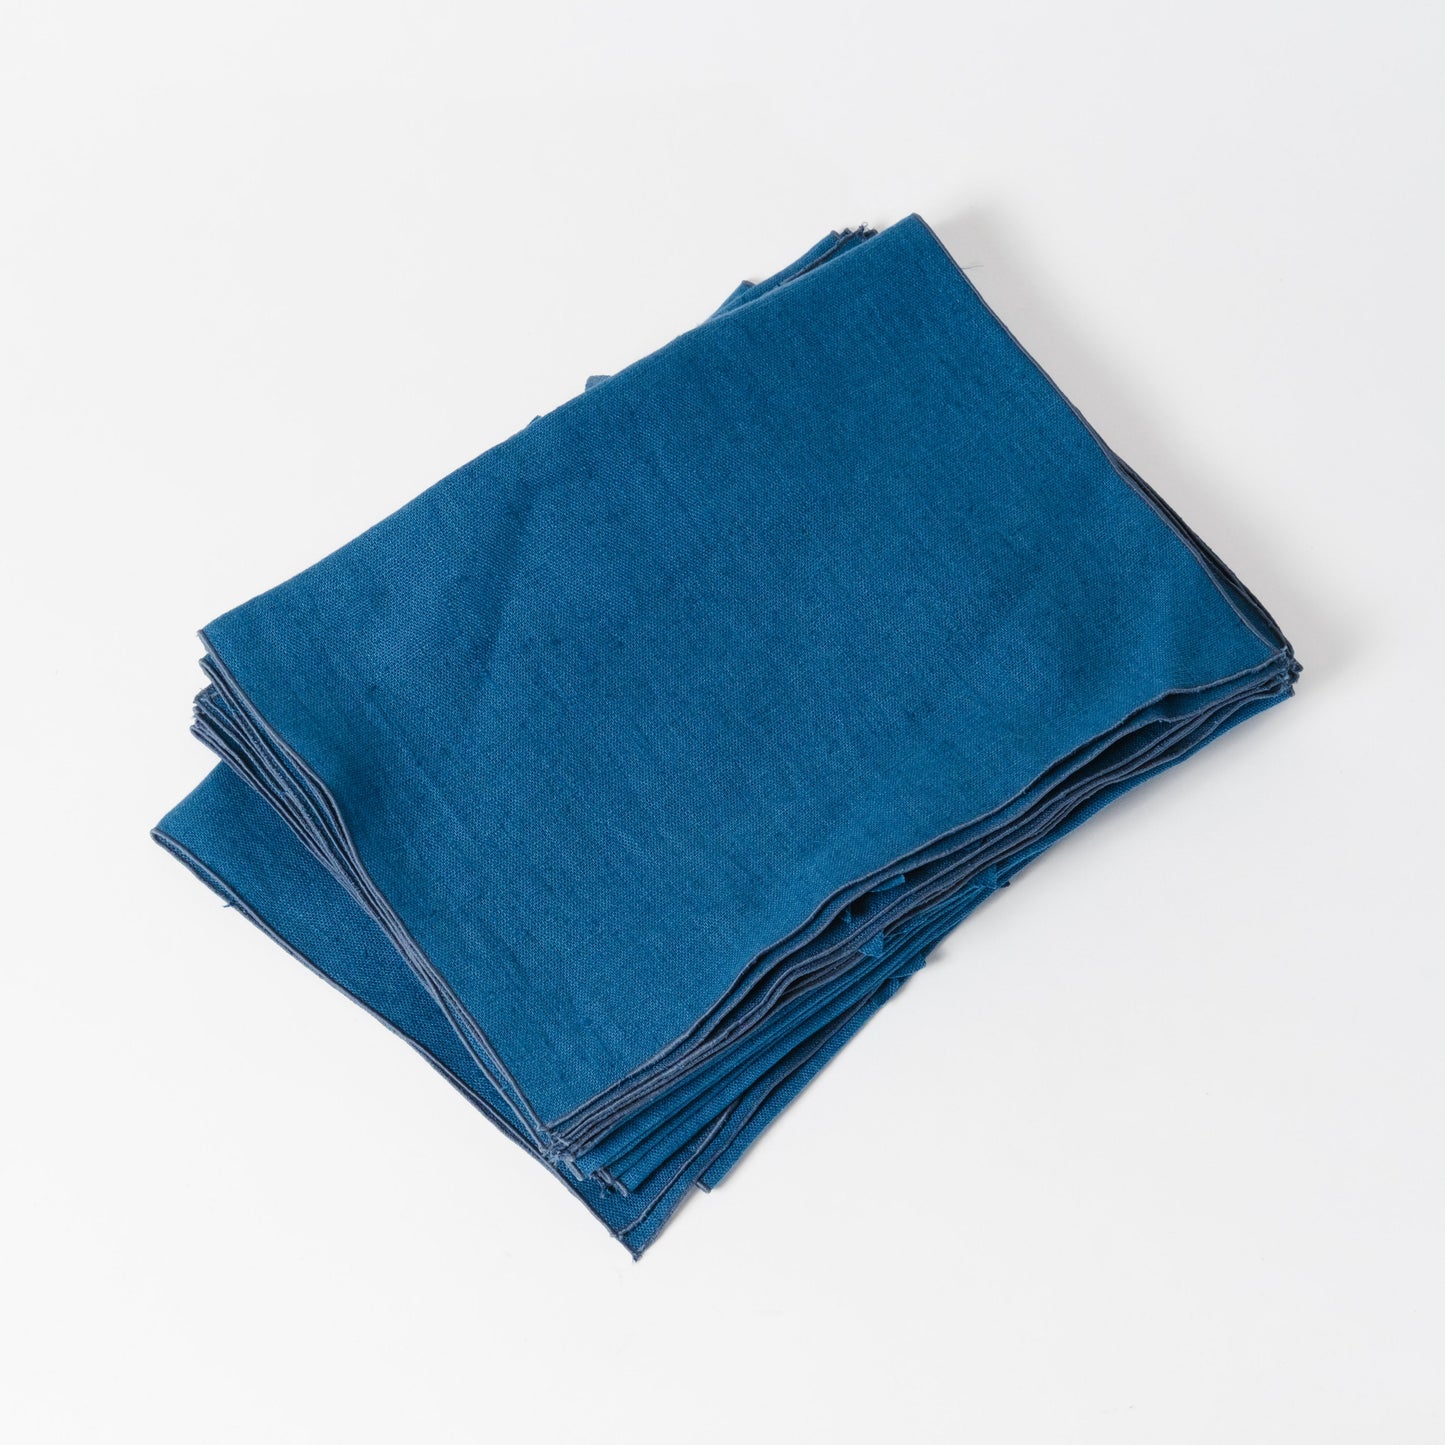 Rectangular Placemat - Blue Common Things